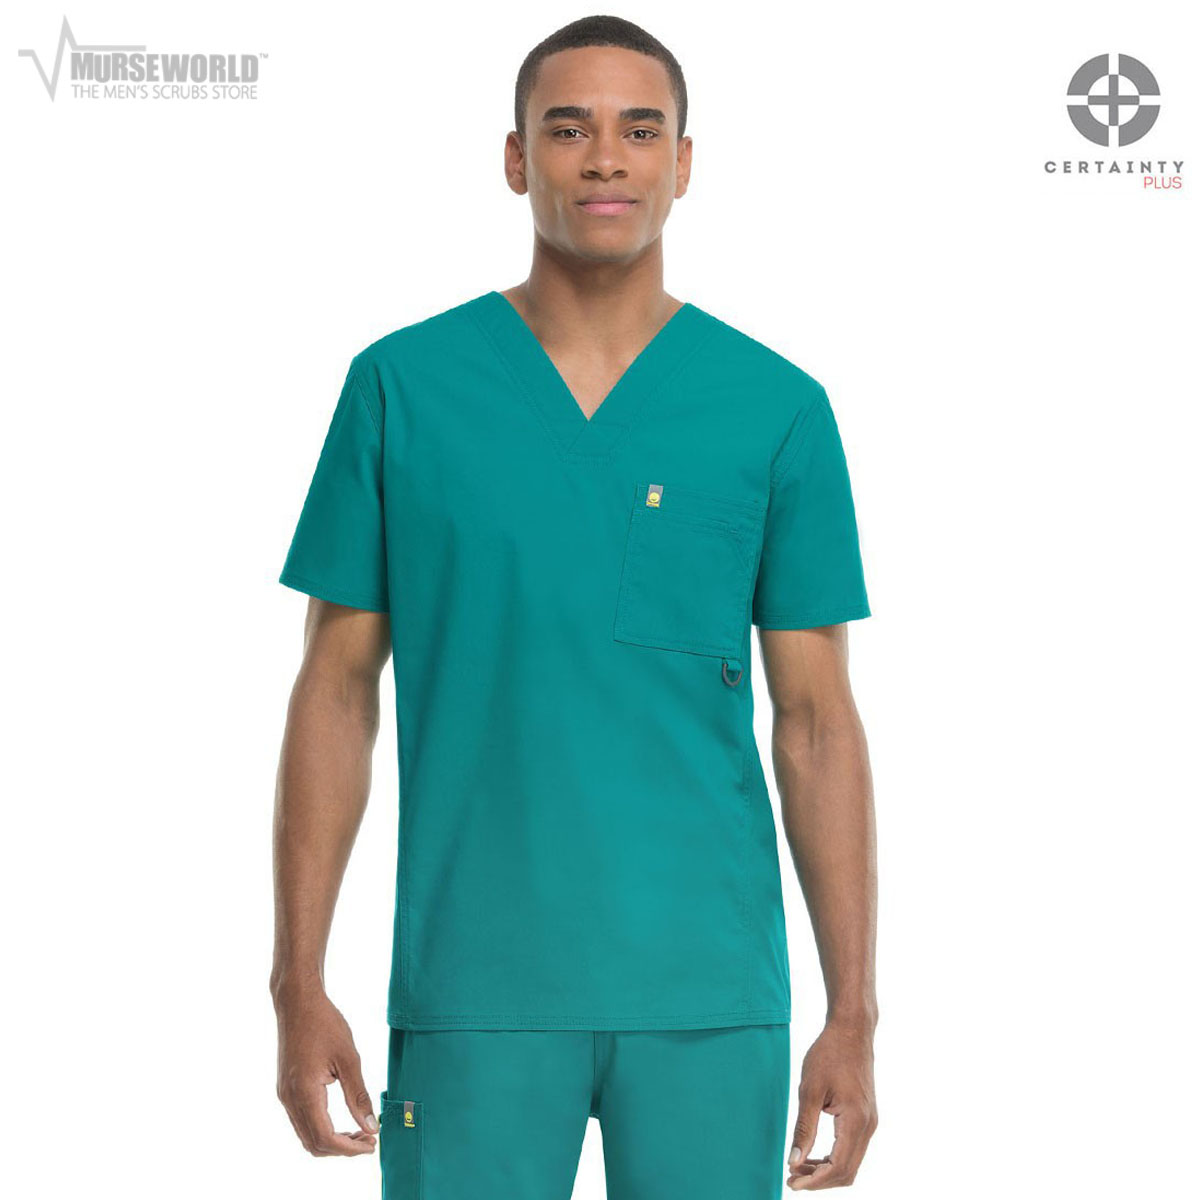 Code Happy Men's Antimicrobial with Fluid Barrier Bliss V-Neck Top feat. Certainty Plus - 16600AB